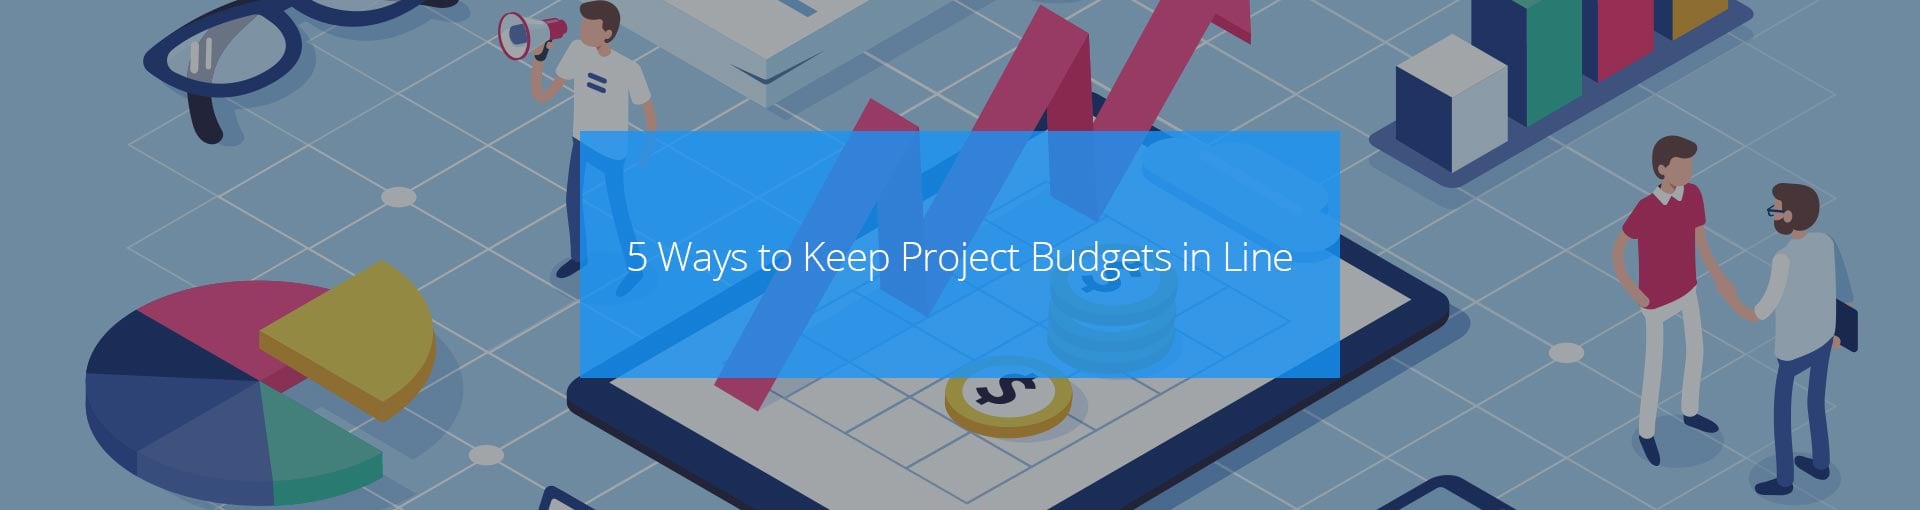 5 Ways to Keep Project Budgets in Line Featured Image